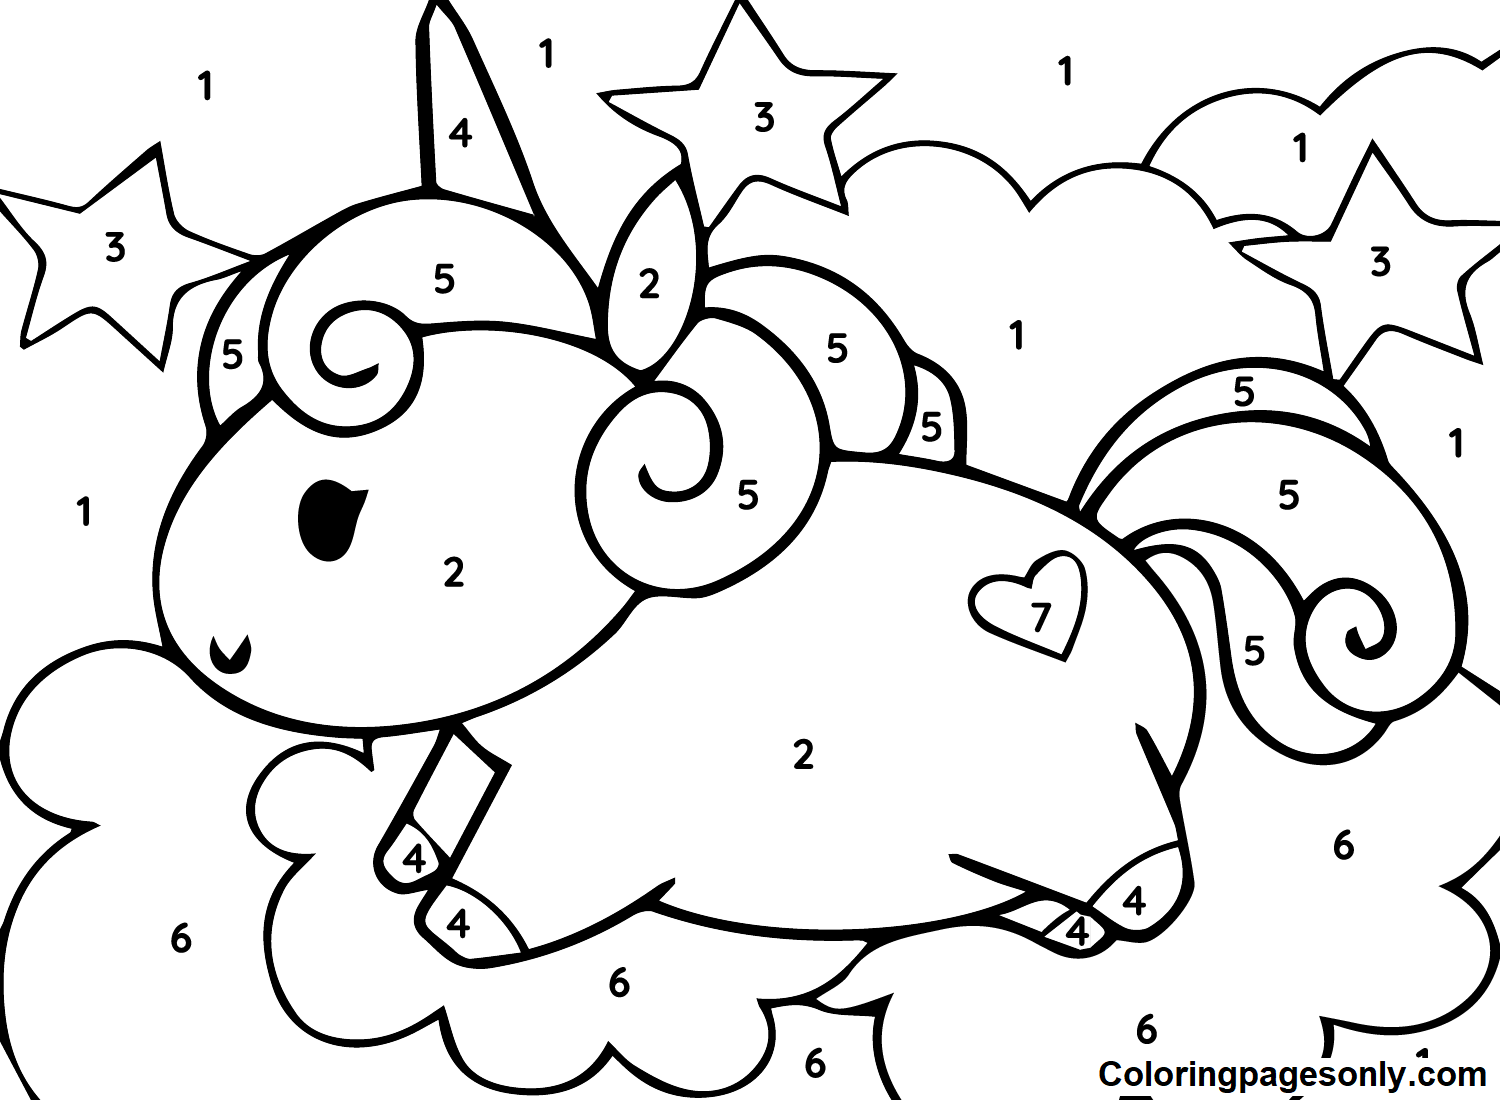 unicorn-color-by-number-coloring-pages-printable-for-free-download